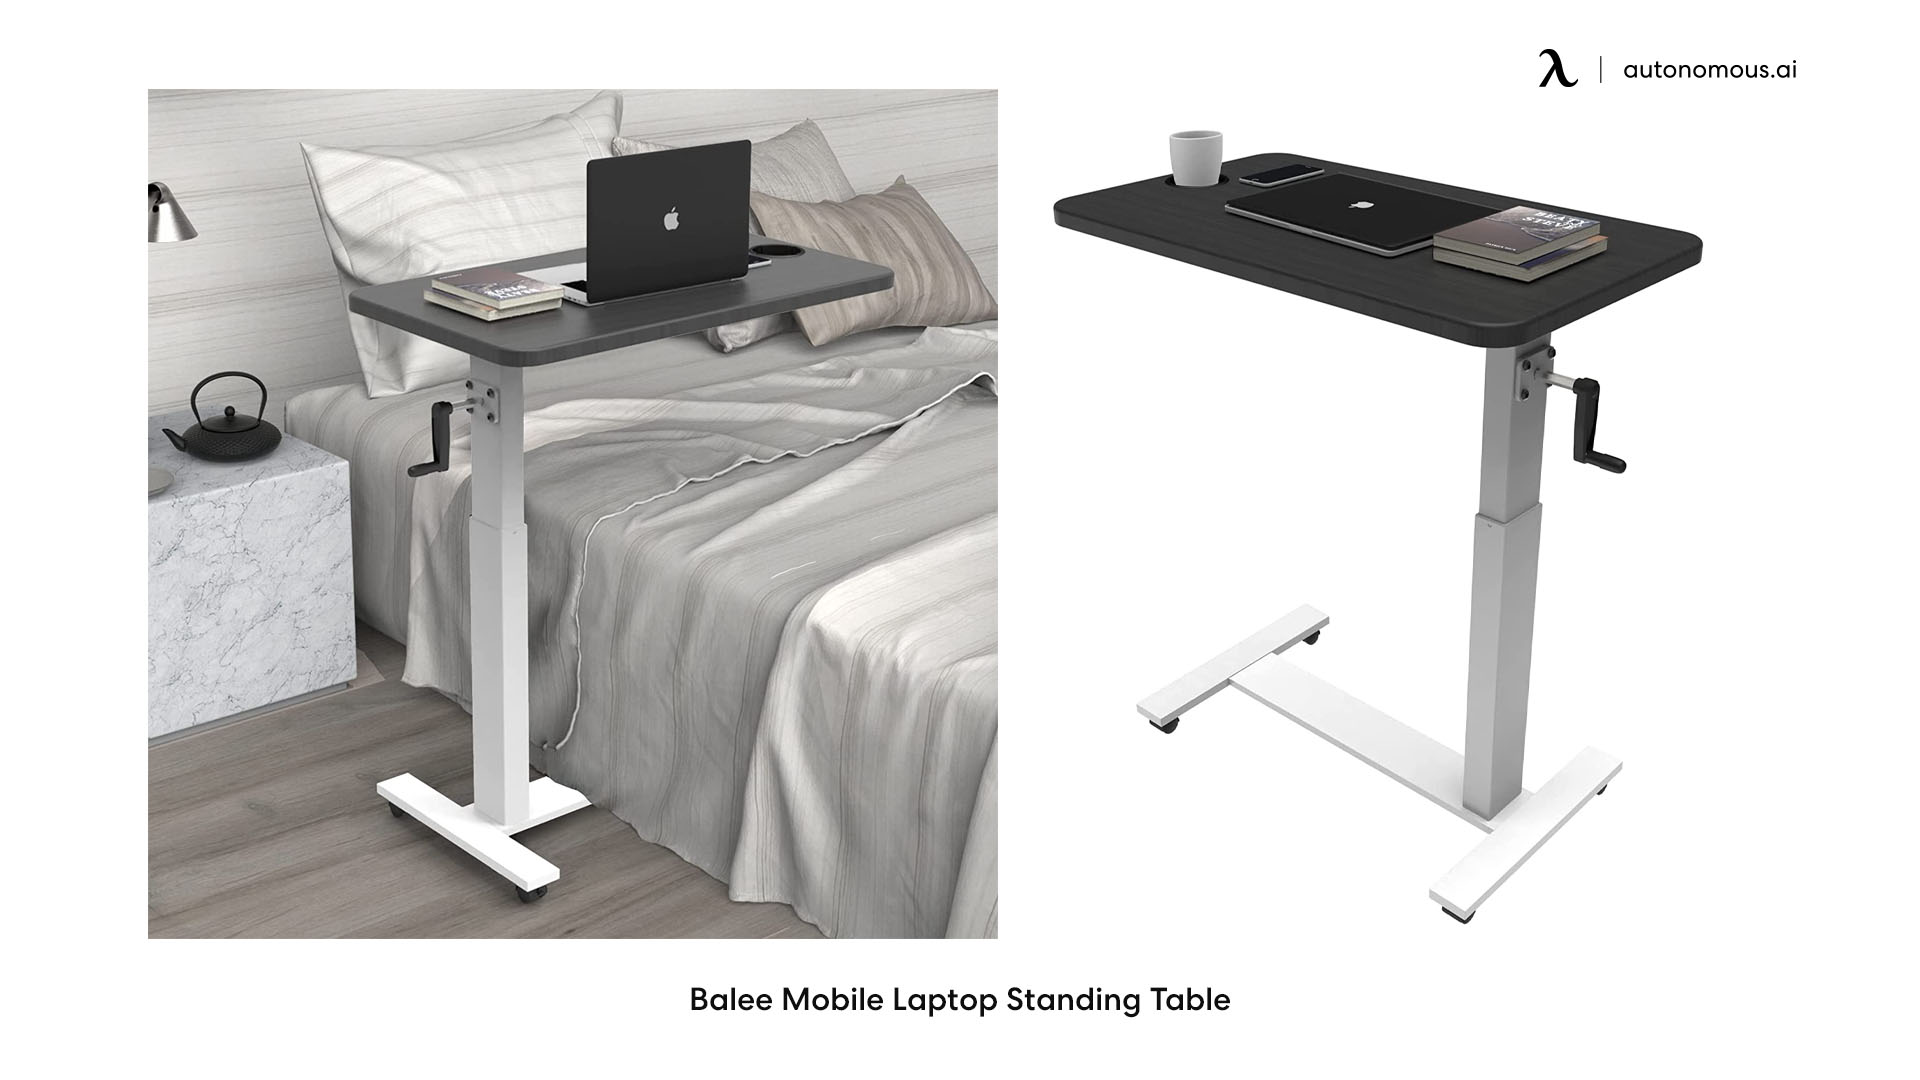 Balee Mobile Laptop Standing Table